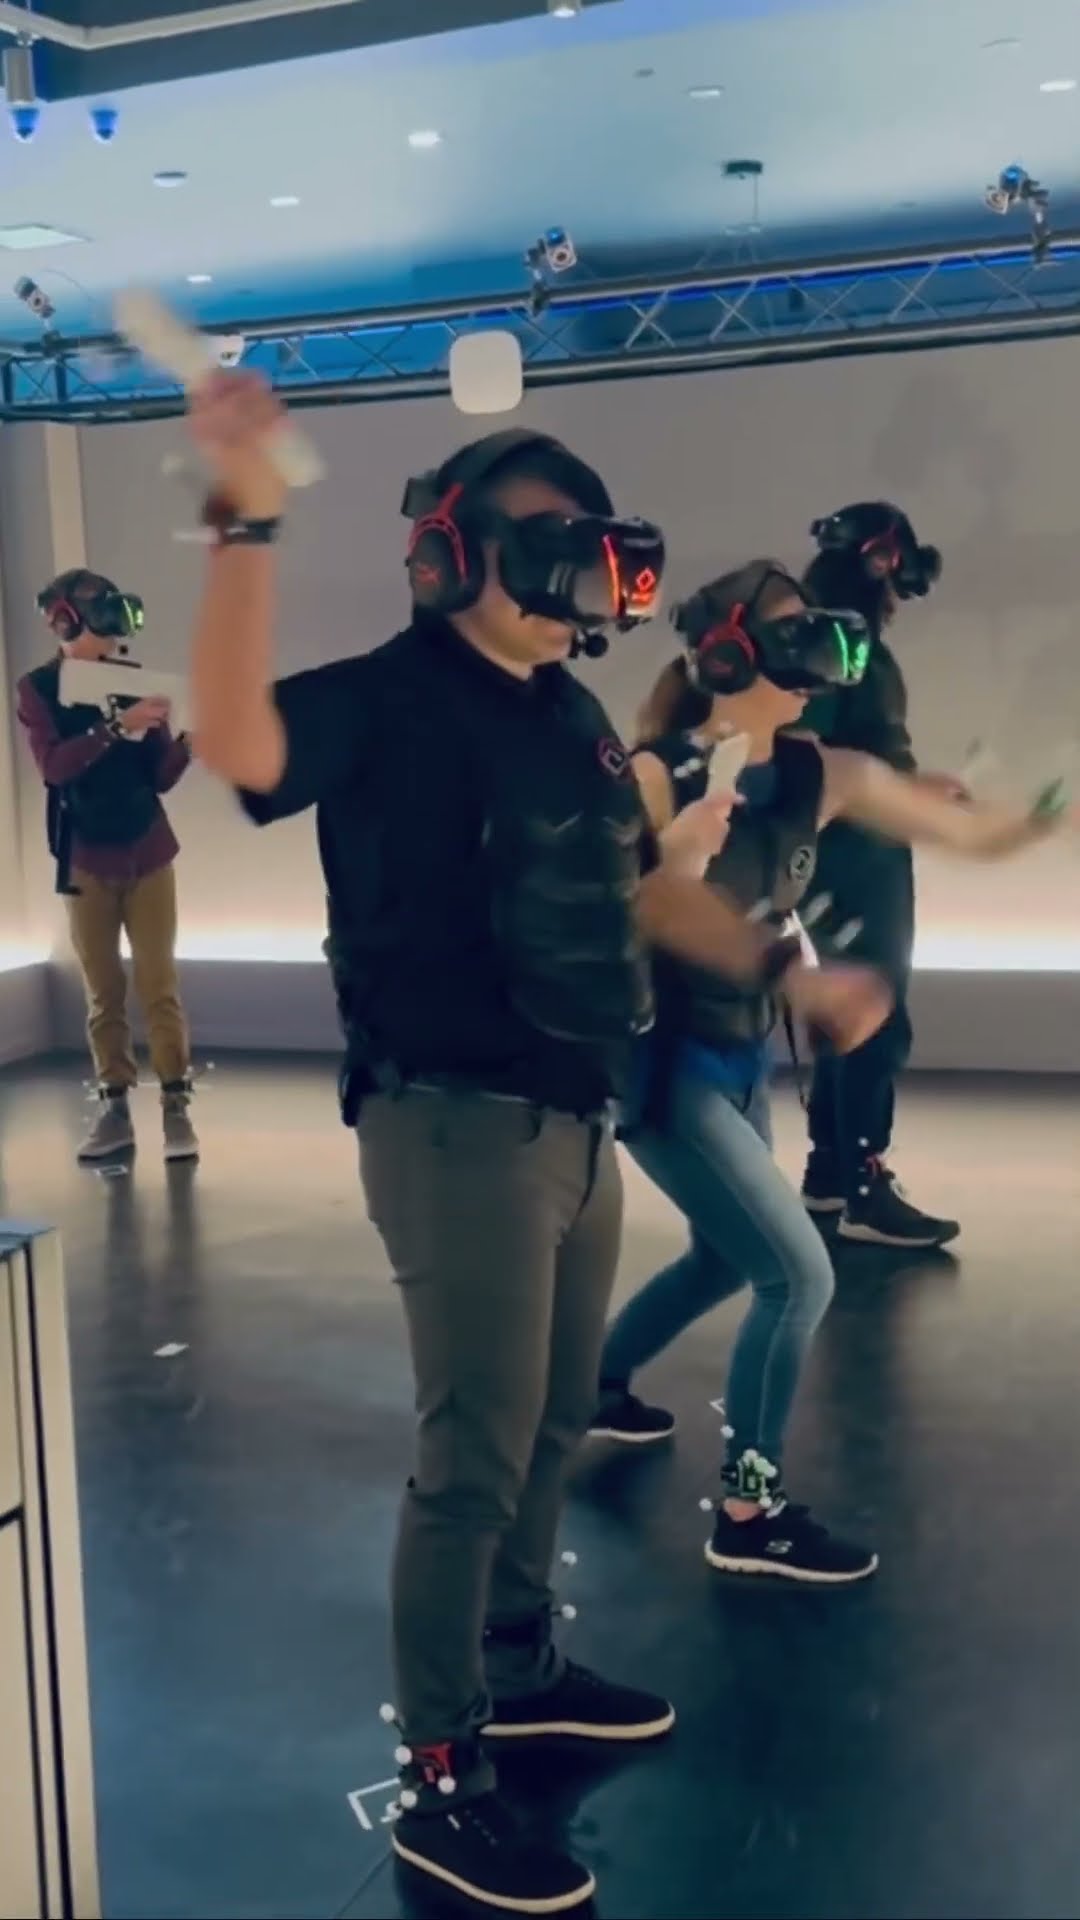 Virtual Reality is a hoot. Dance off! #shorts